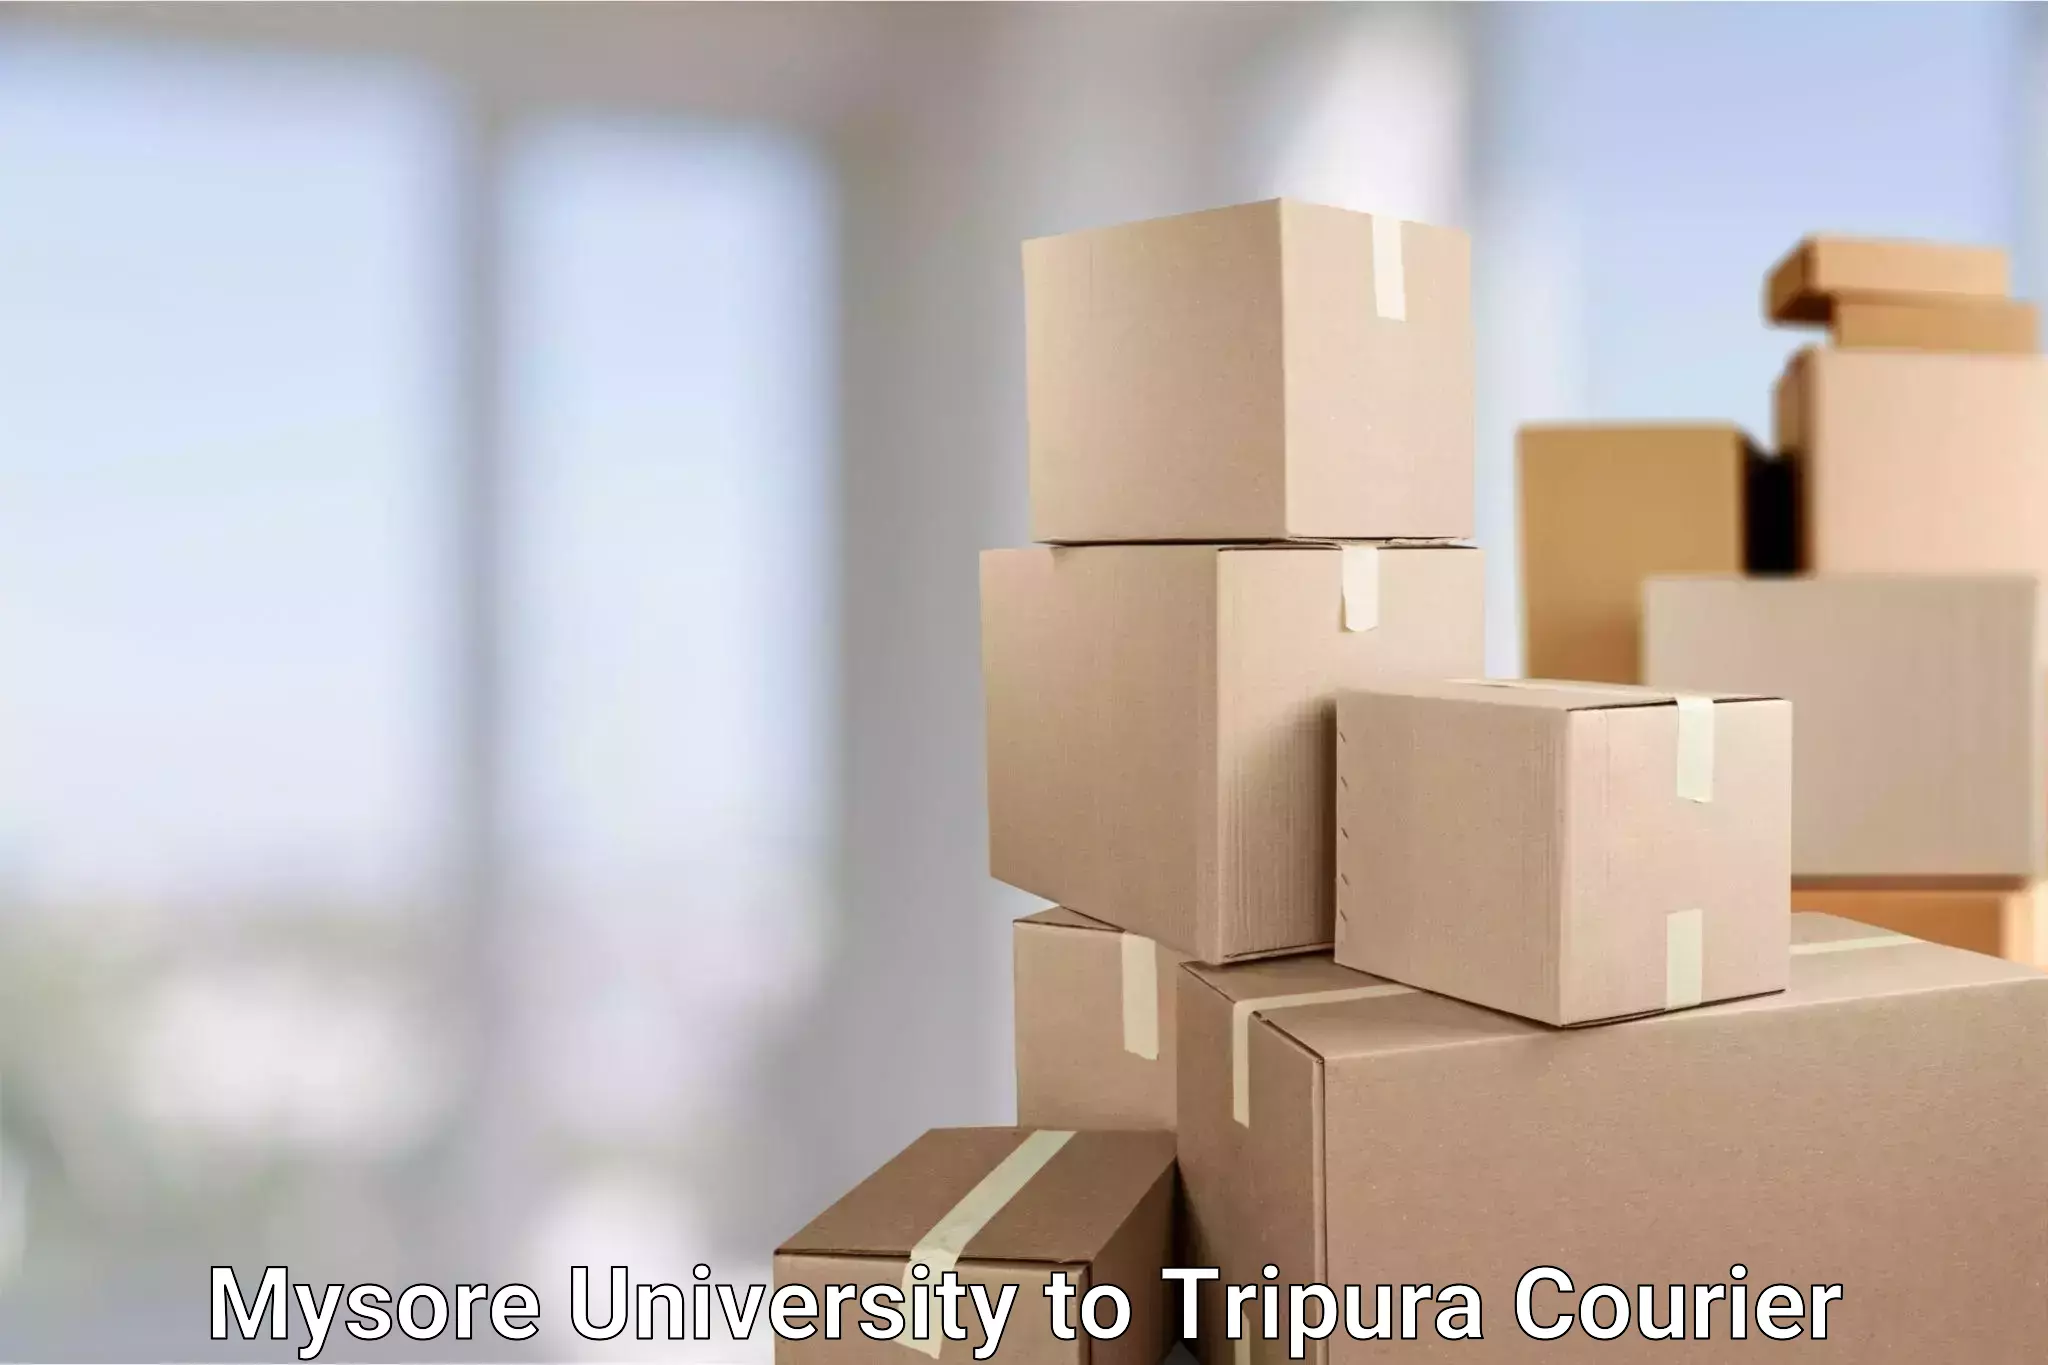 Optimized courier strategies in Mysore University to Udaipur Tripura